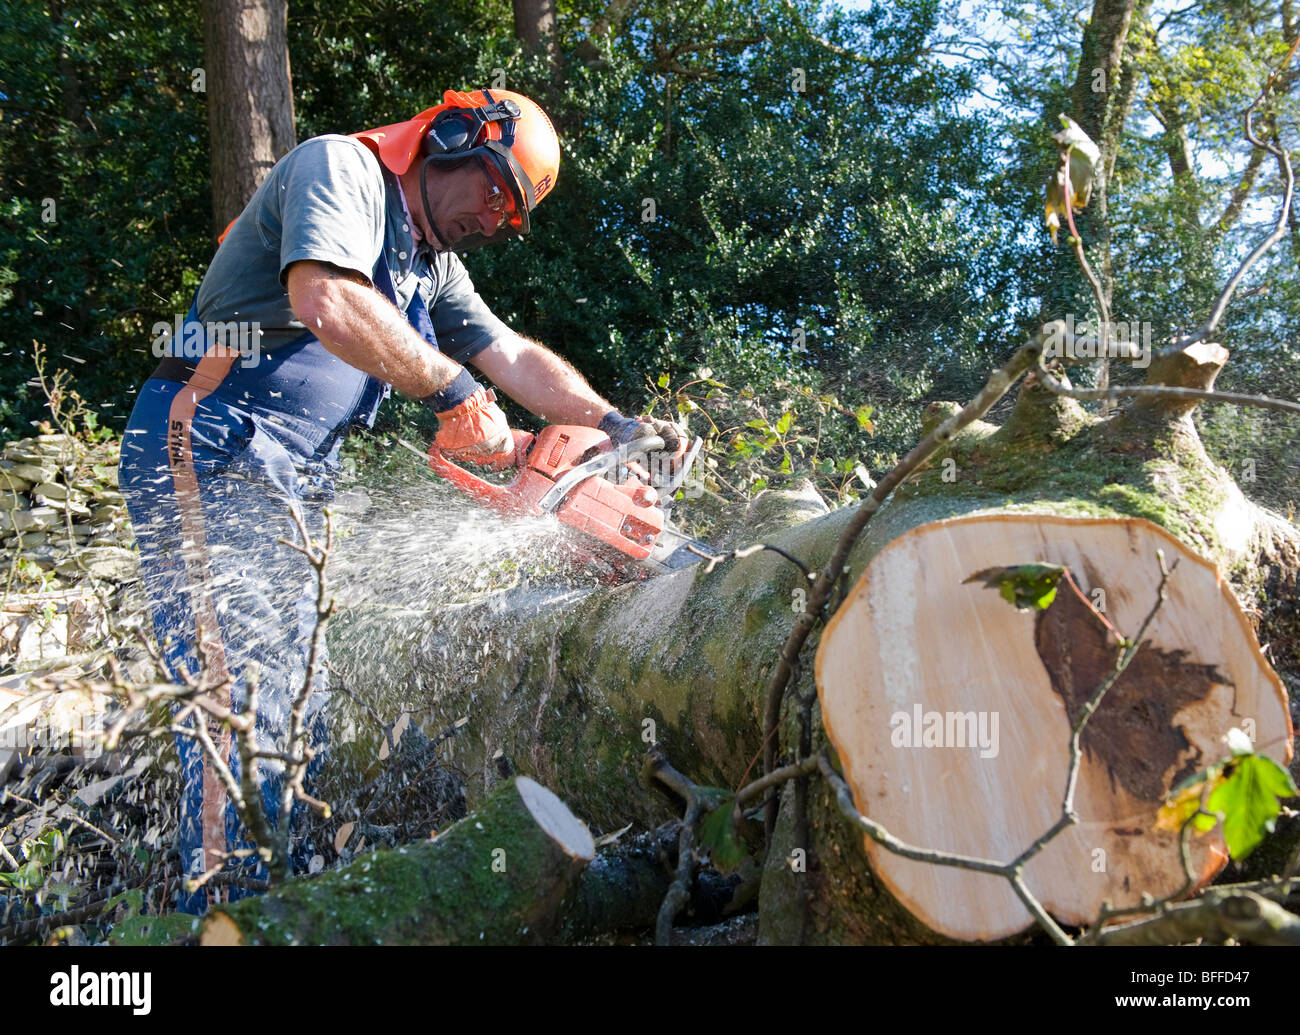 Tree surgeon tree felling and tree surgery. Chainsaw crosscutting. Stock Photo